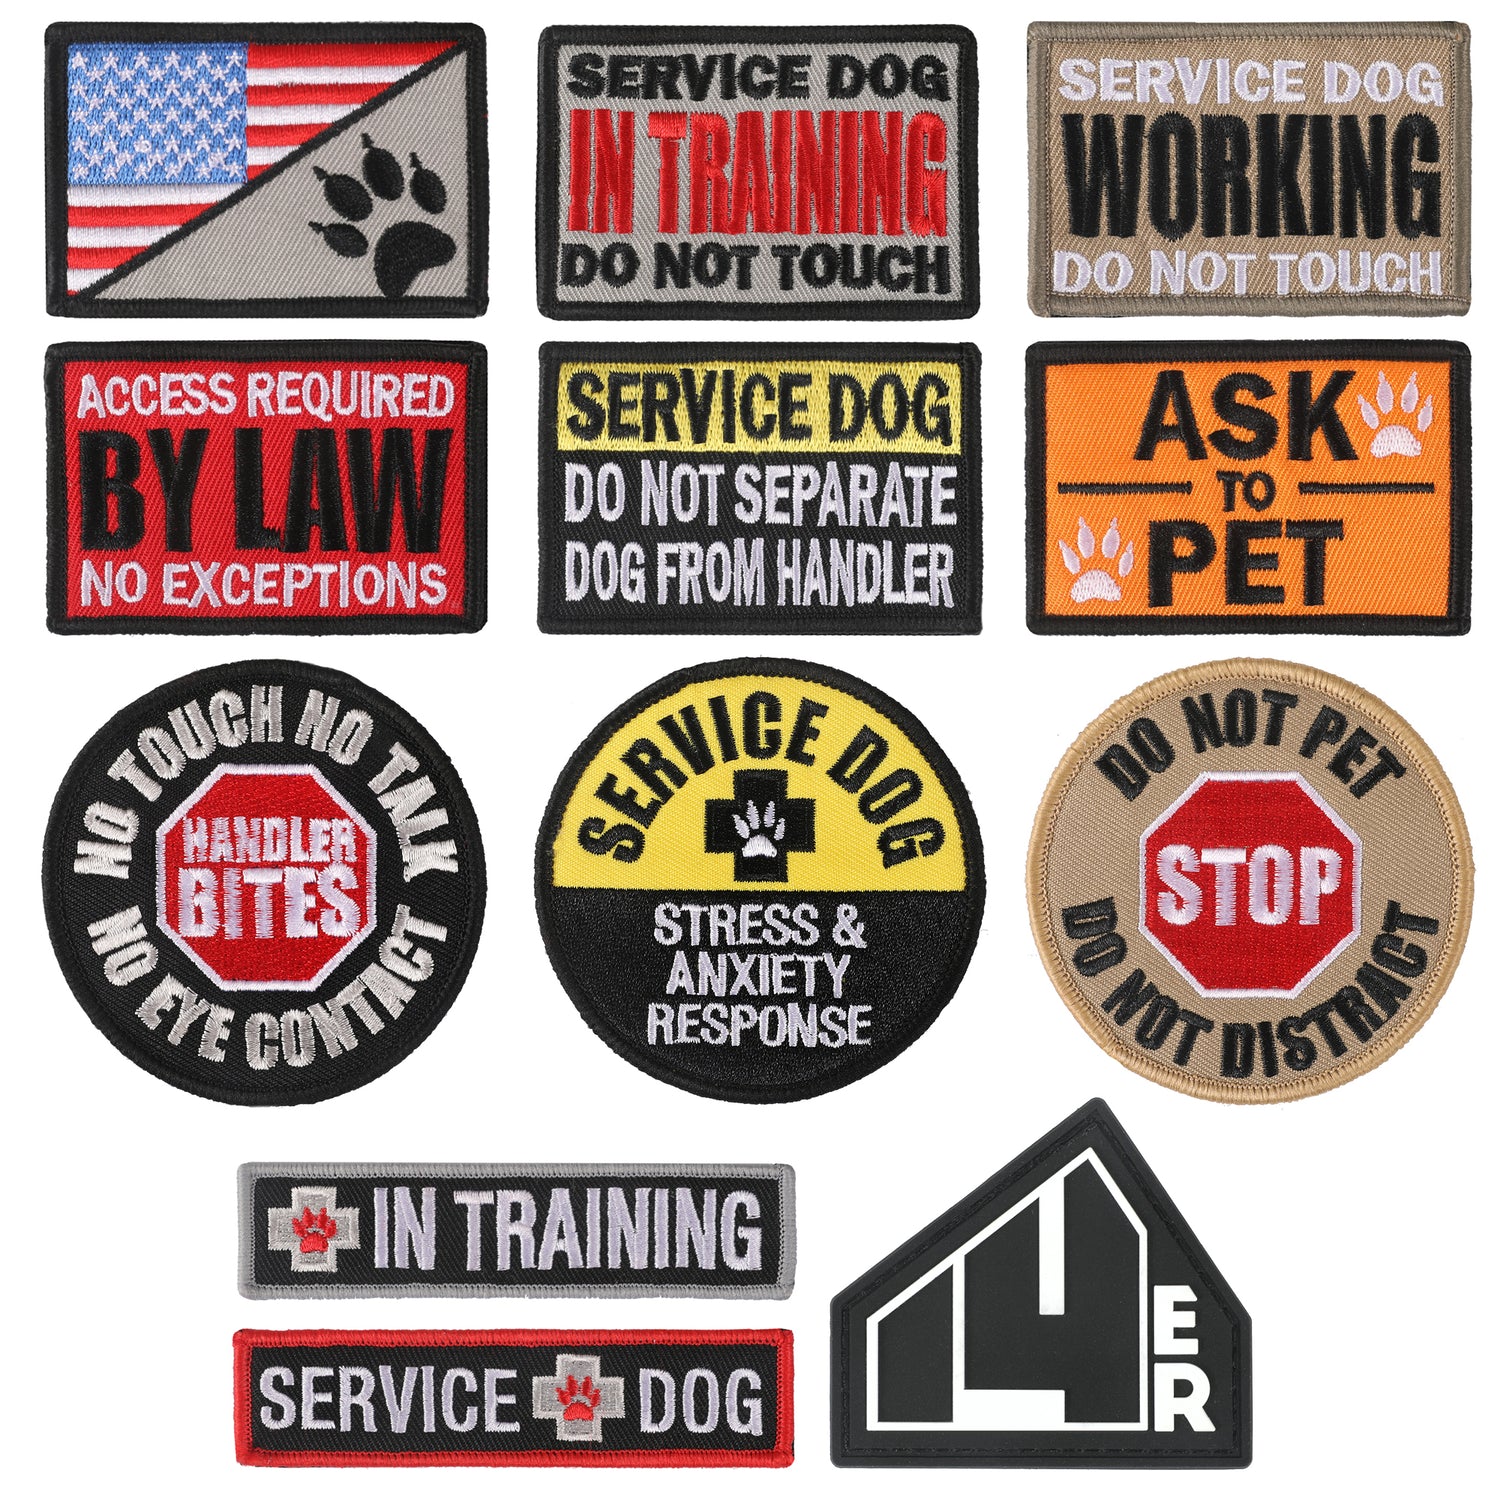 Embroidered Service Dog In Training Dog Patches with Hook/Loop